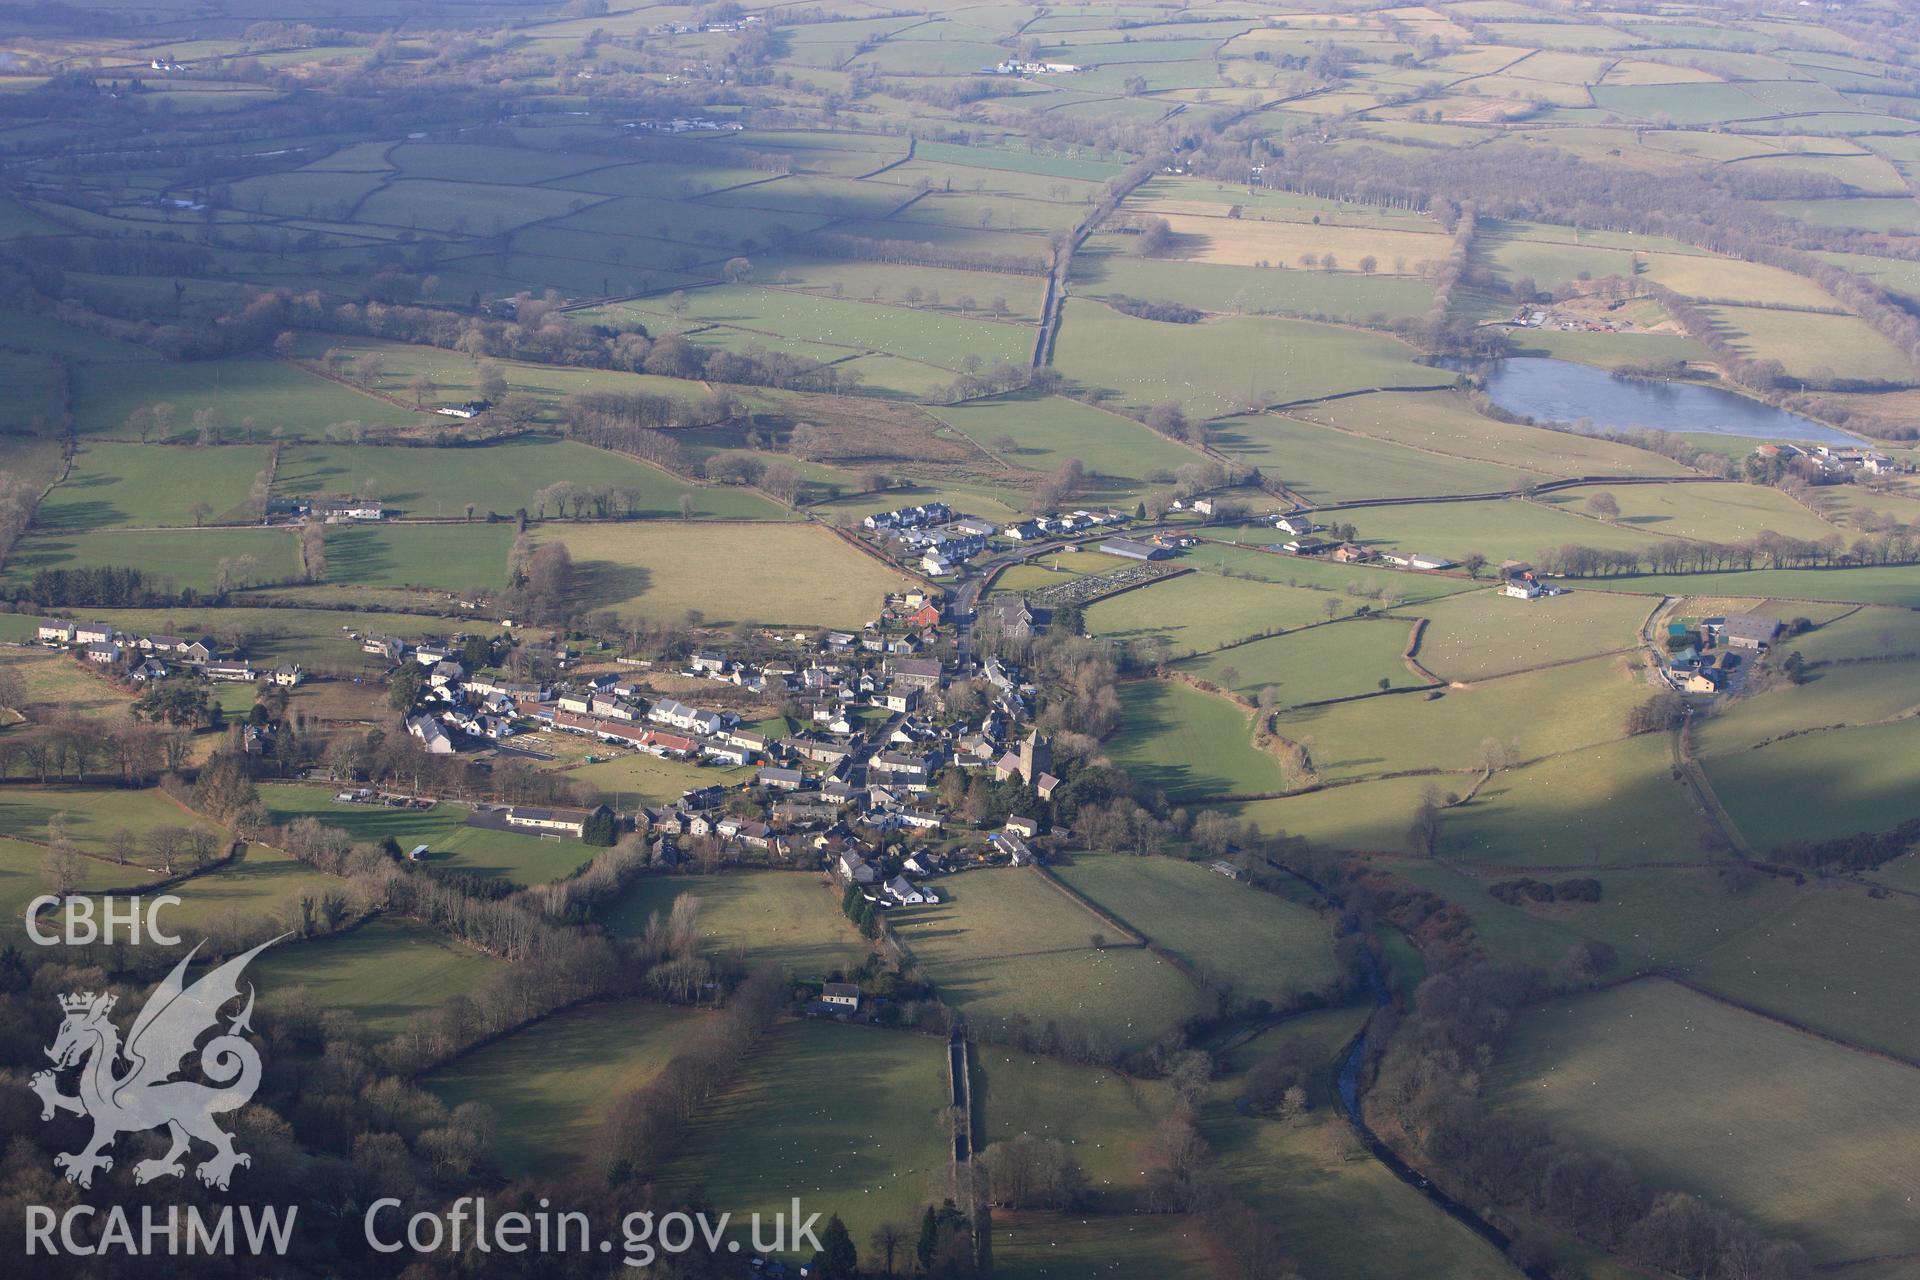 RCAHMW colour oblique photograph of Llanddewi Brefi, View from South. Taken by Toby Driver on 07/02/2012.